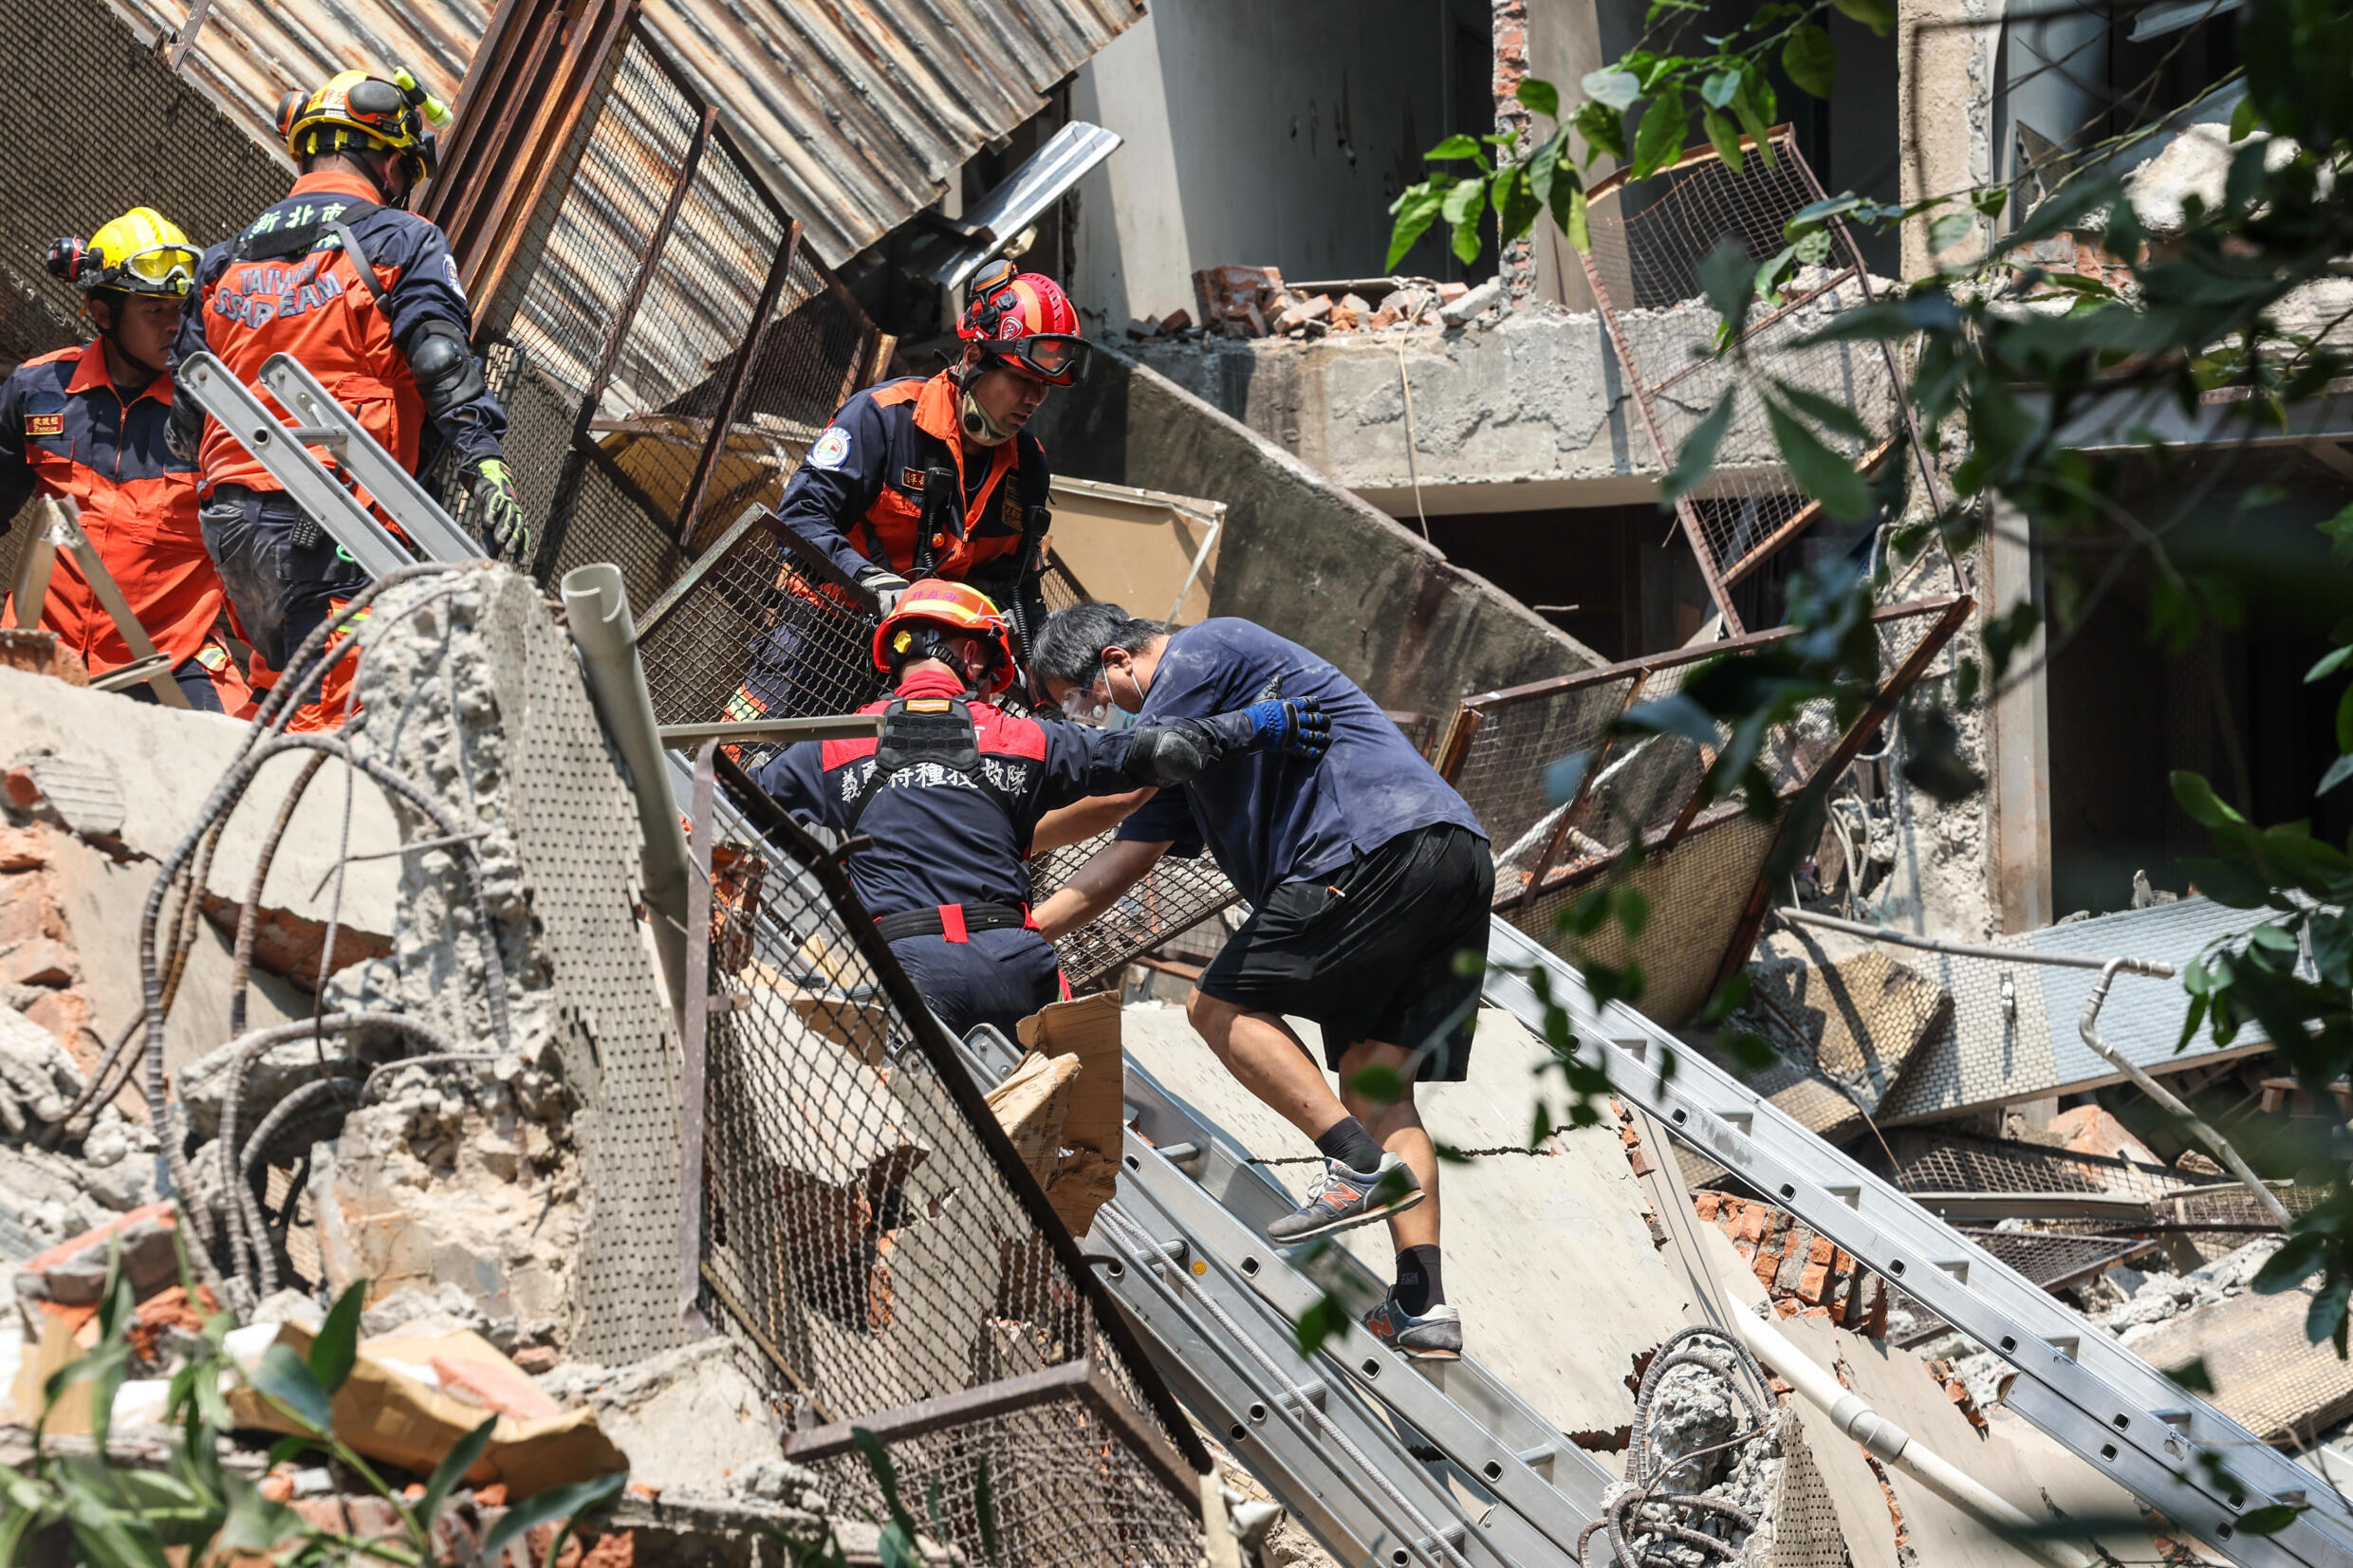 A Central News Agency photo shows emergency workers assisting a survivor after he was rescued from a damaged building in New Taipei City